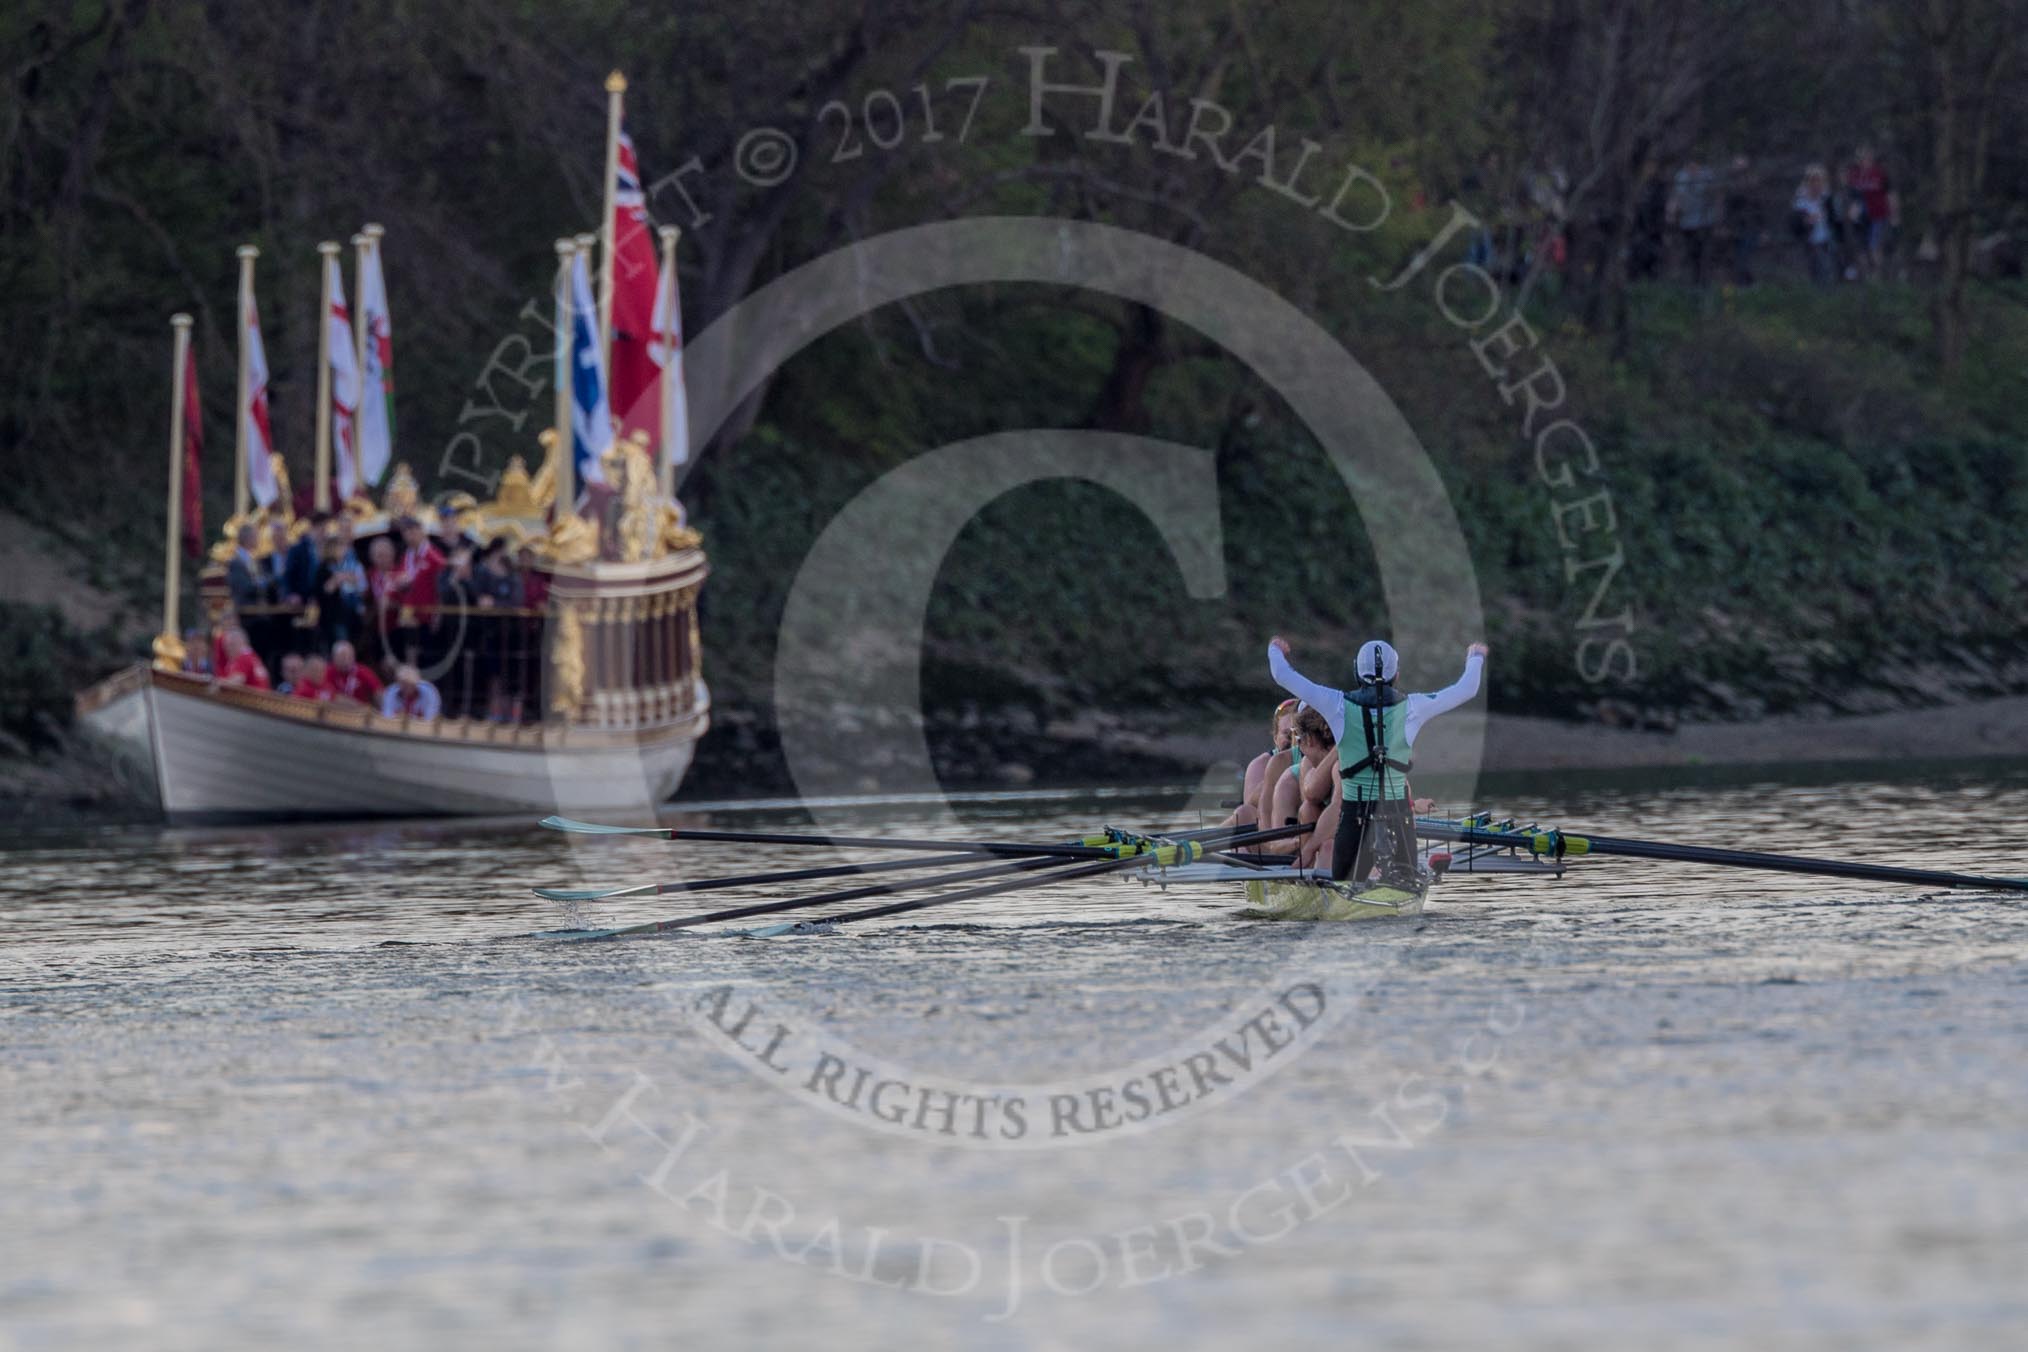 The Boat Race season 2017 -  The Cancer Research Women's Boat Race: Cambridge has won the Women's Boat Race, with jubilant cox Matthew Holland. On the left the Royal Barge Gloriana.
River Thames between Putney Bridge and Mortlake,
London SW15,

United Kingdom,
on 02 April 2017 at 16:54, image #180